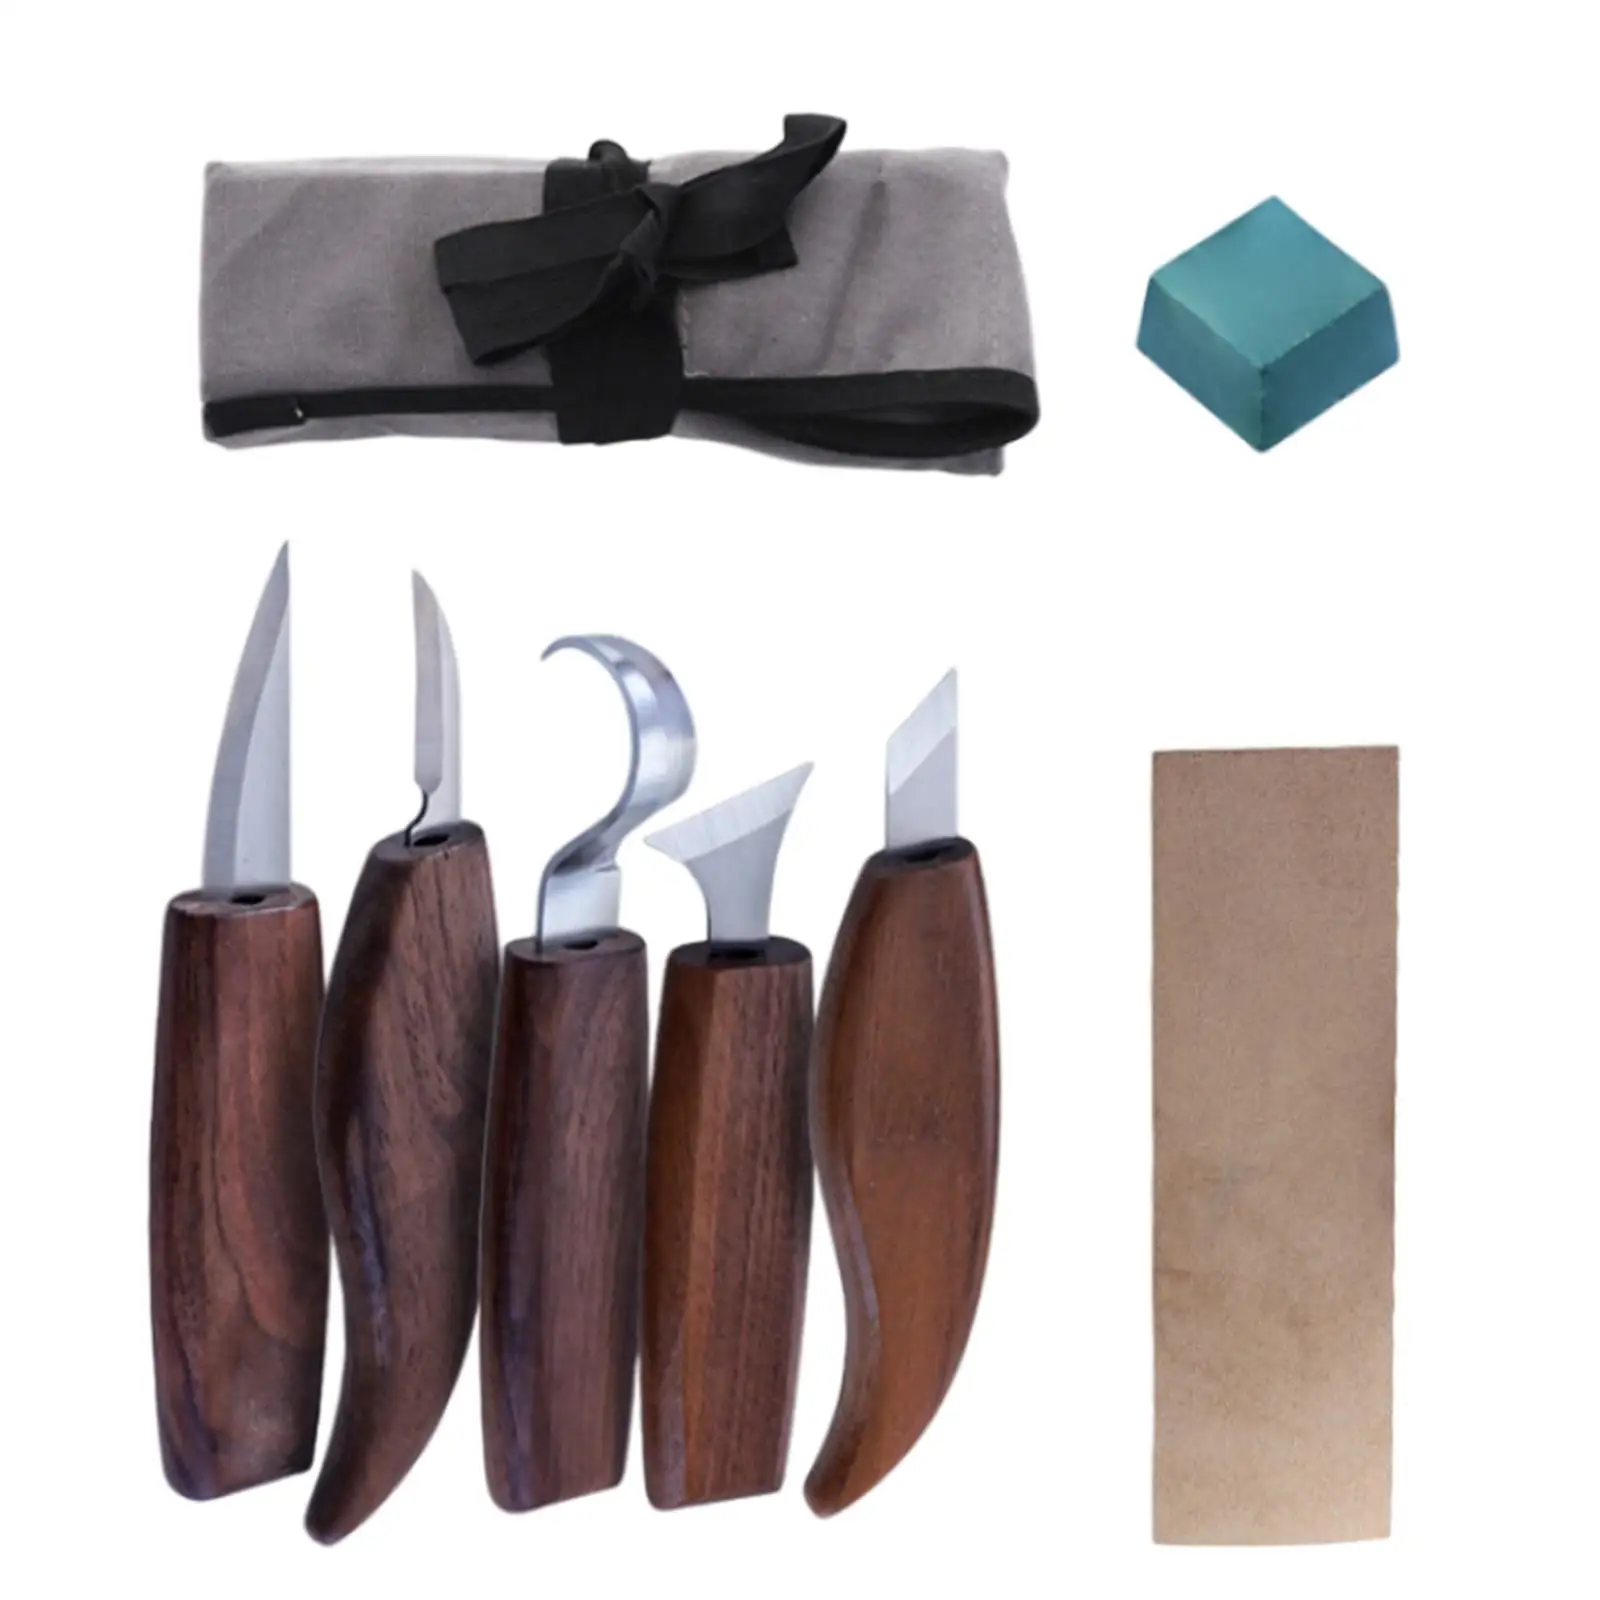 8 Pieces Wood Carving Tools Durable Wear Resistant Hand Carving Knife Set for Handmade Wood Carving Paper Carving Kids Adults